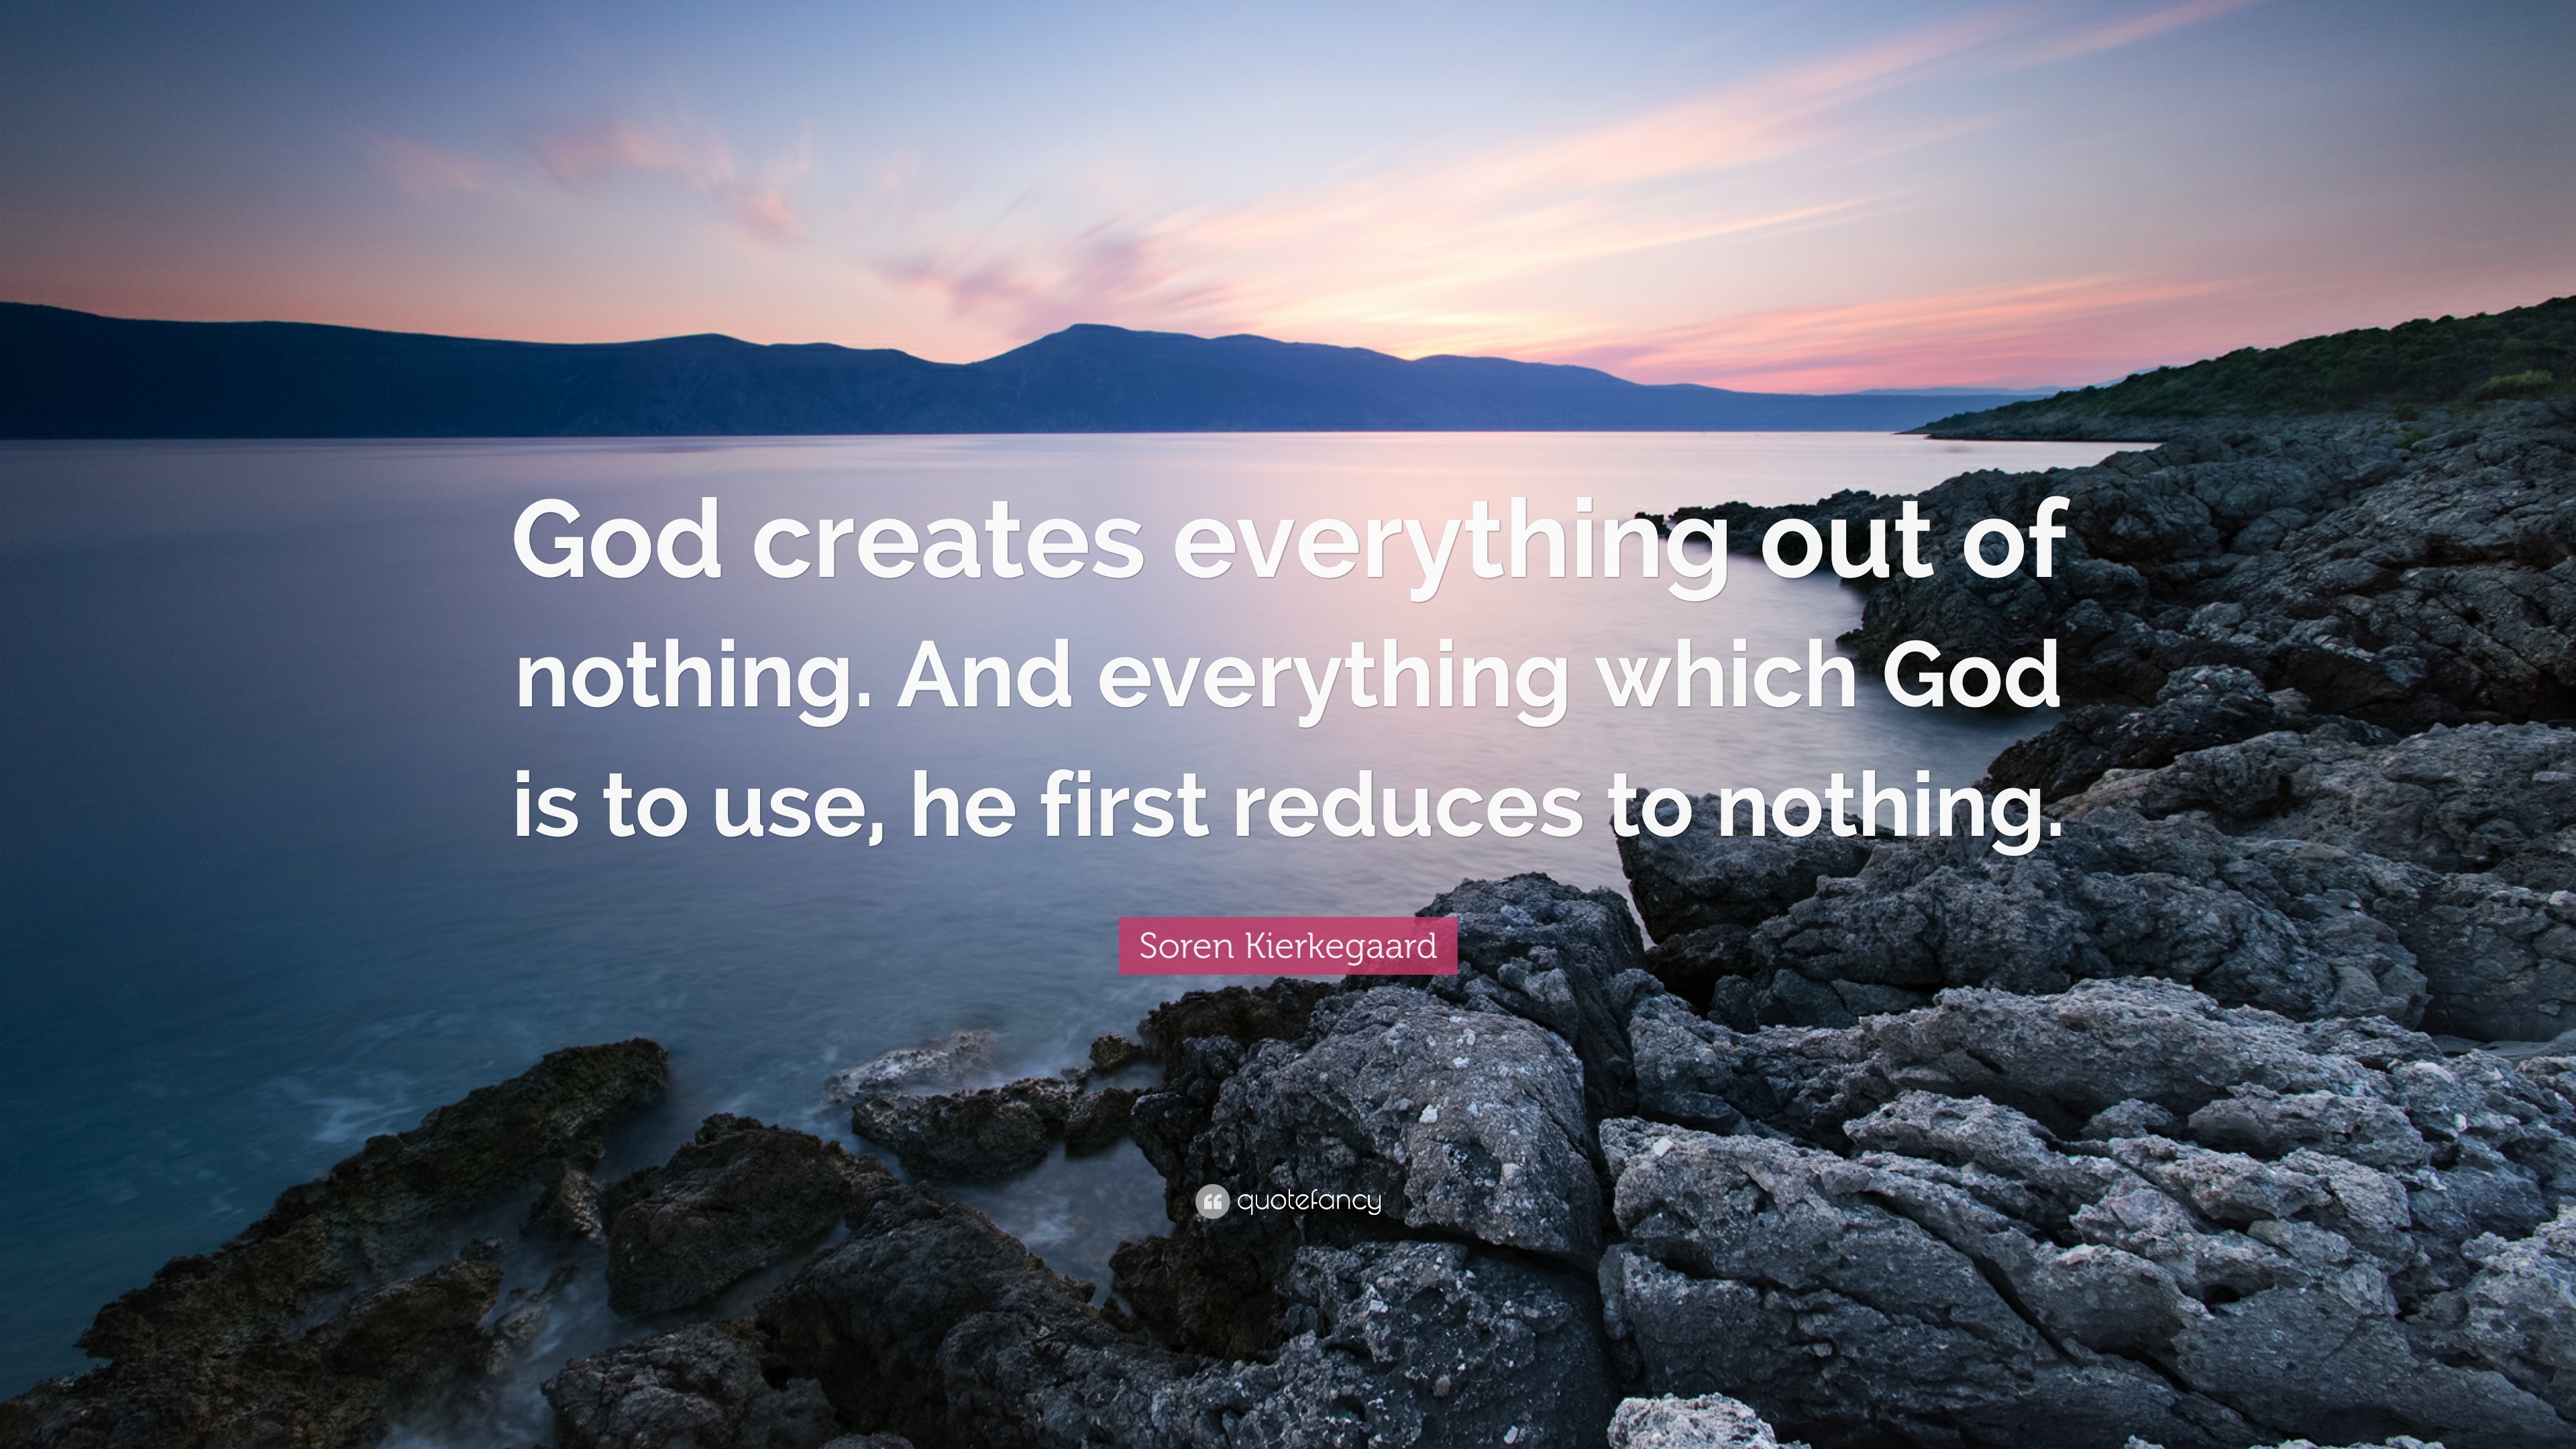 Soren Kierkegaard Quote “God creates everything out of nothing And everything which God